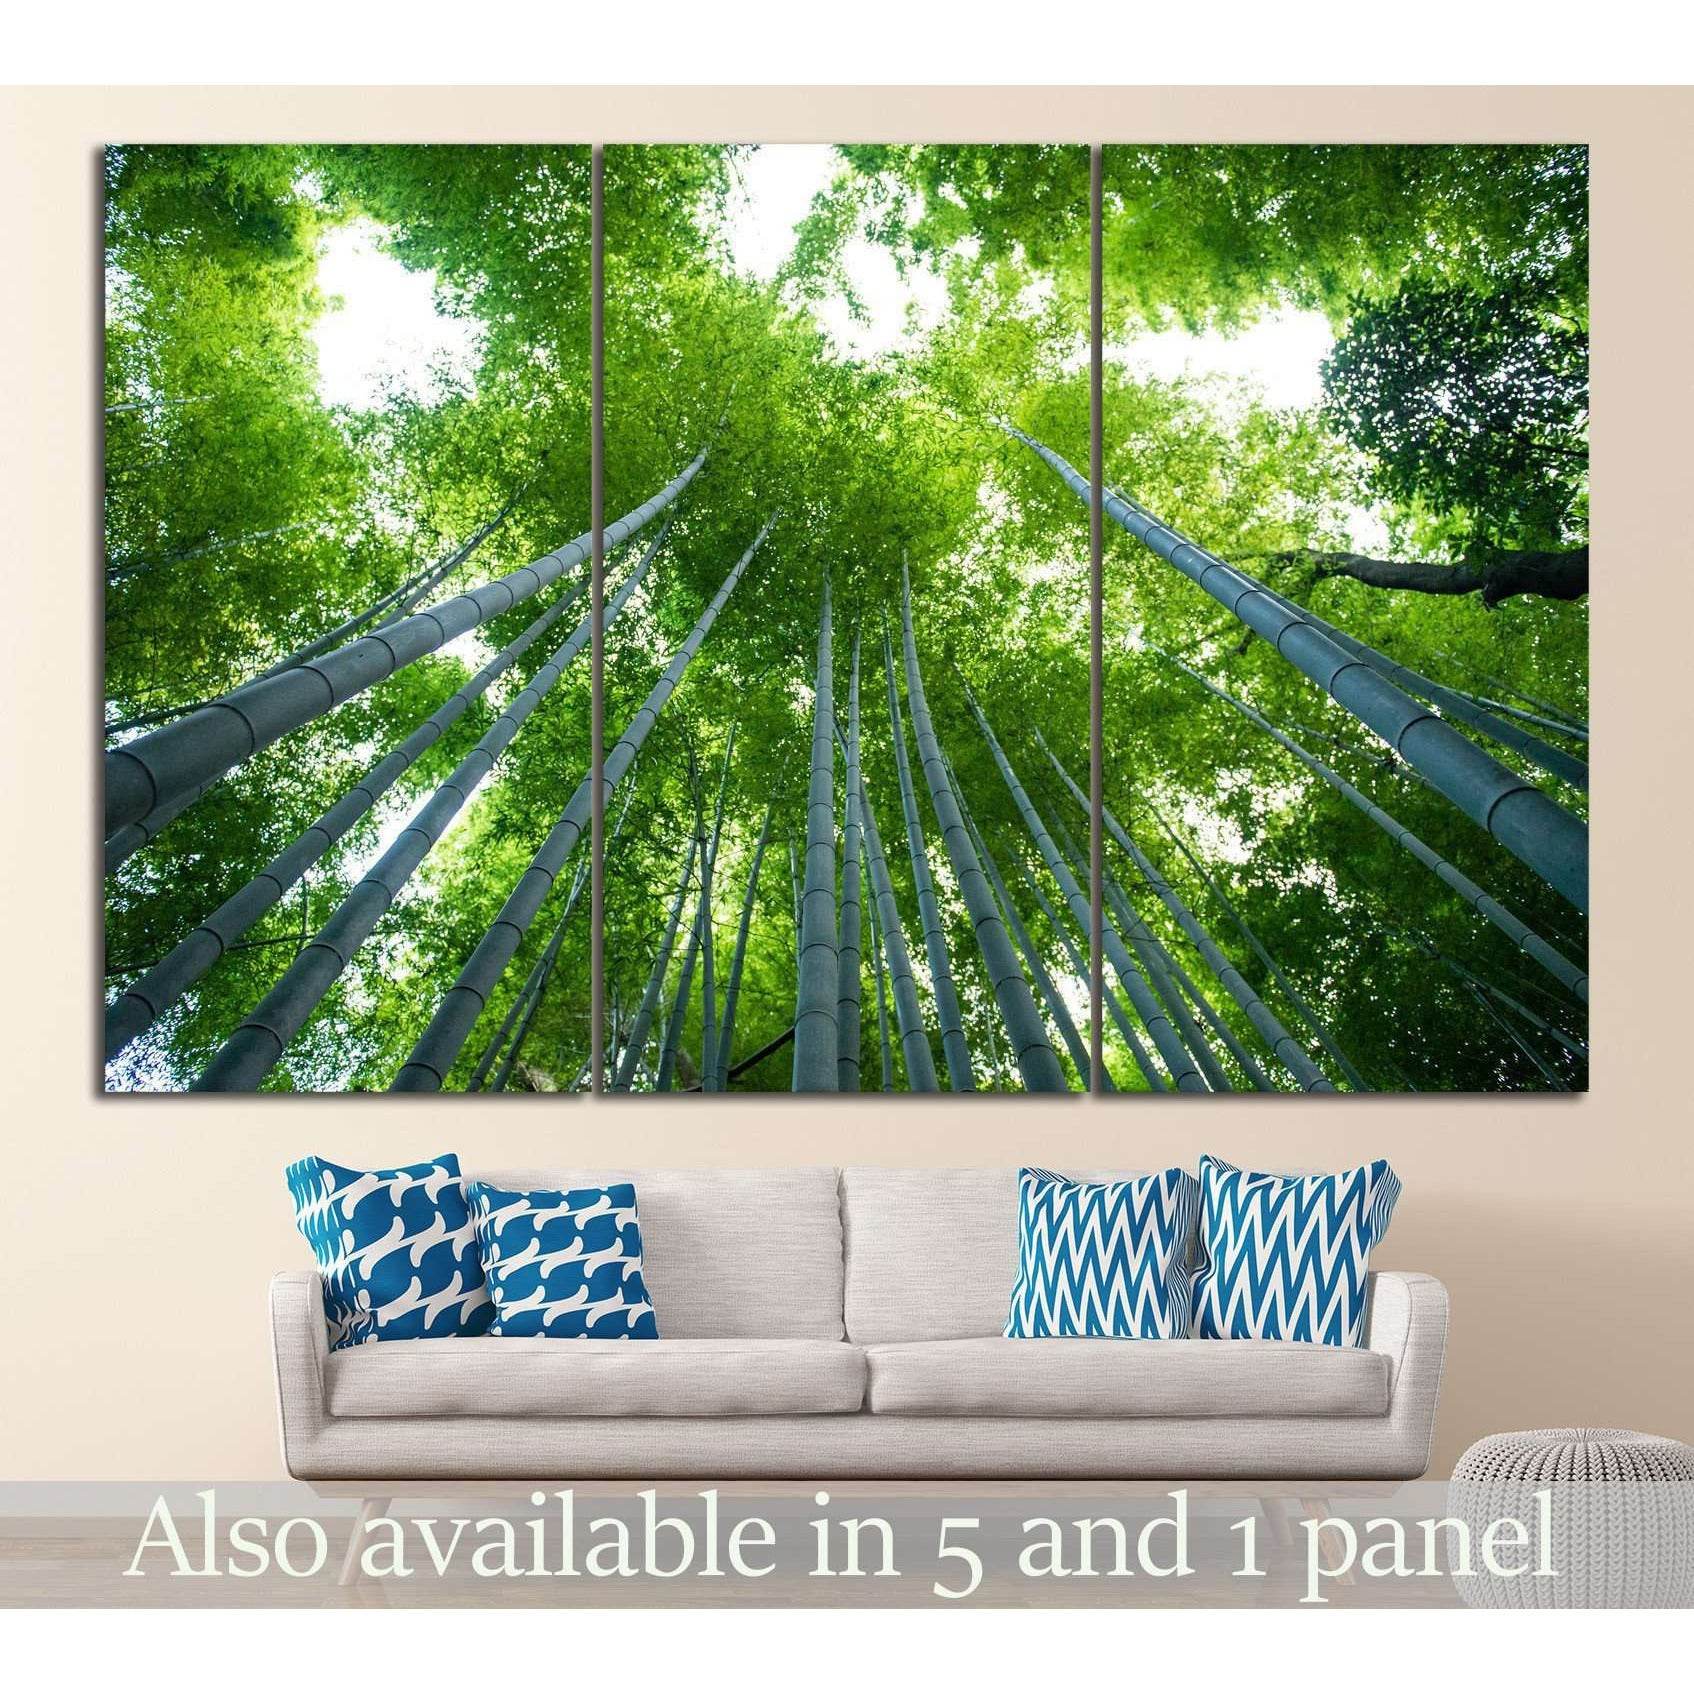 Bamboo forest, Kyoto, Japan №18 Ready to Hang Canvas Print